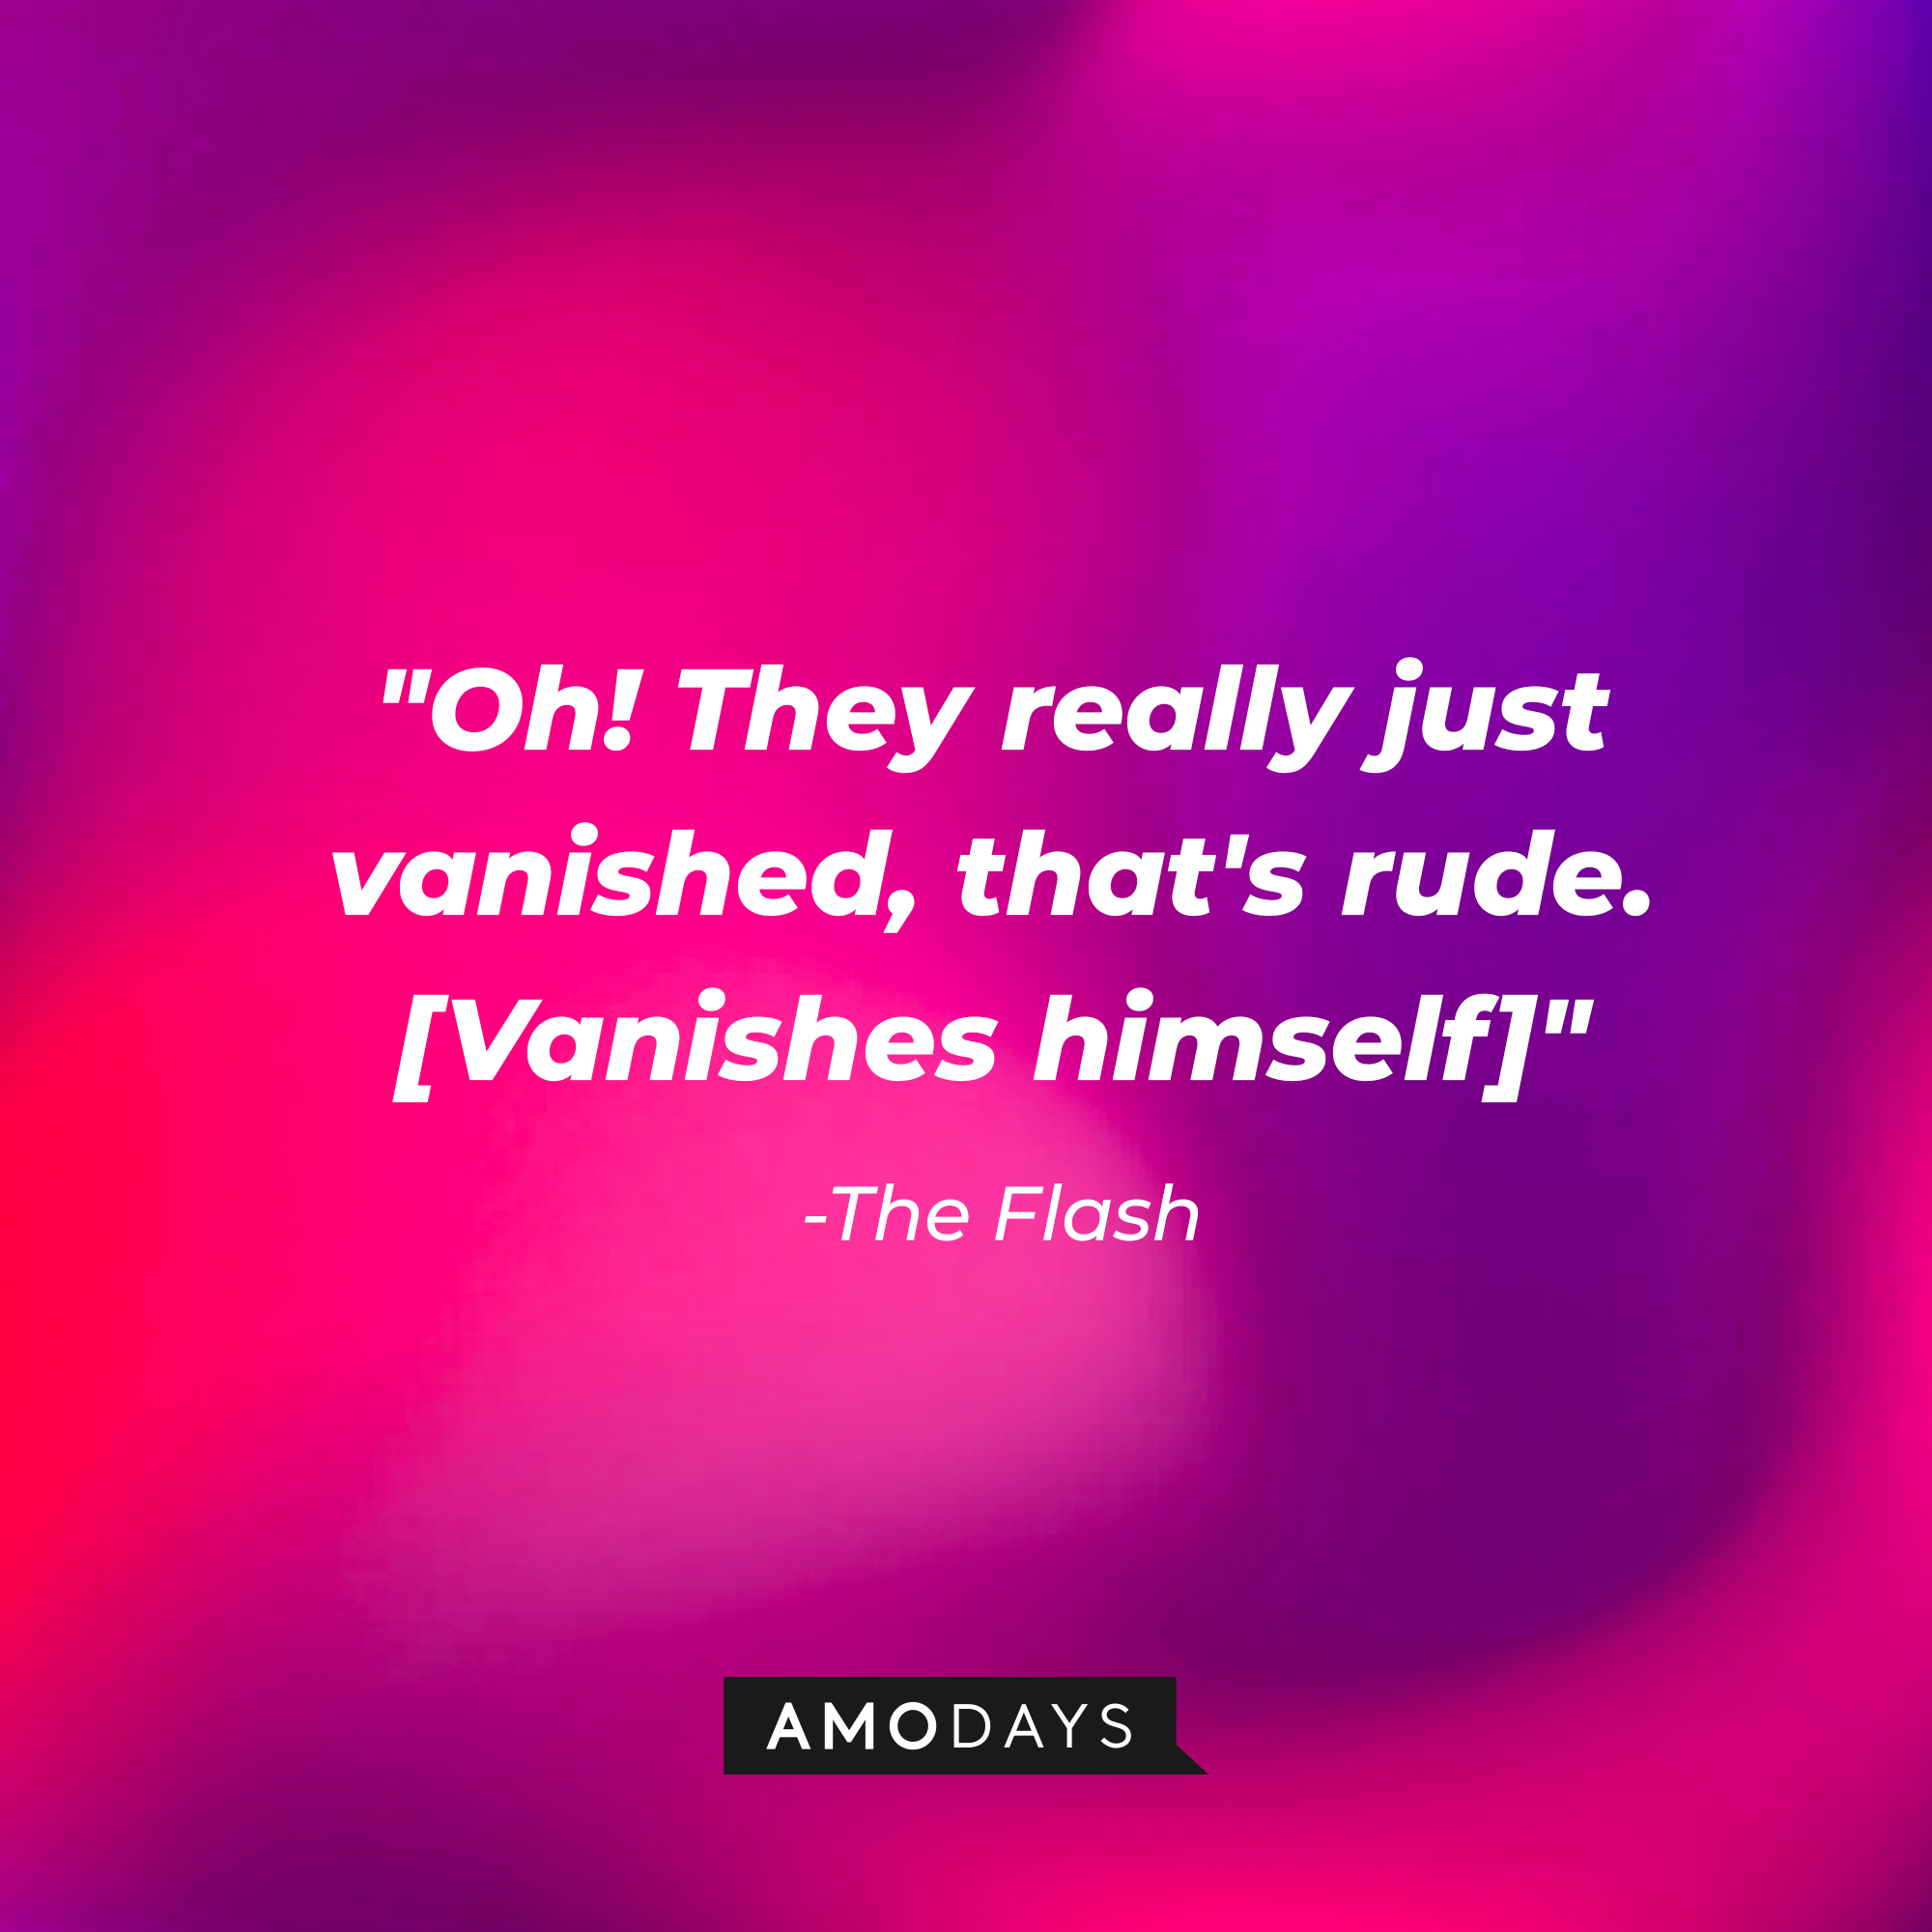 The Flash's quote, "Oh! They really just vanished, that's rude. [Vanishes himself]" | Source: AmoDays